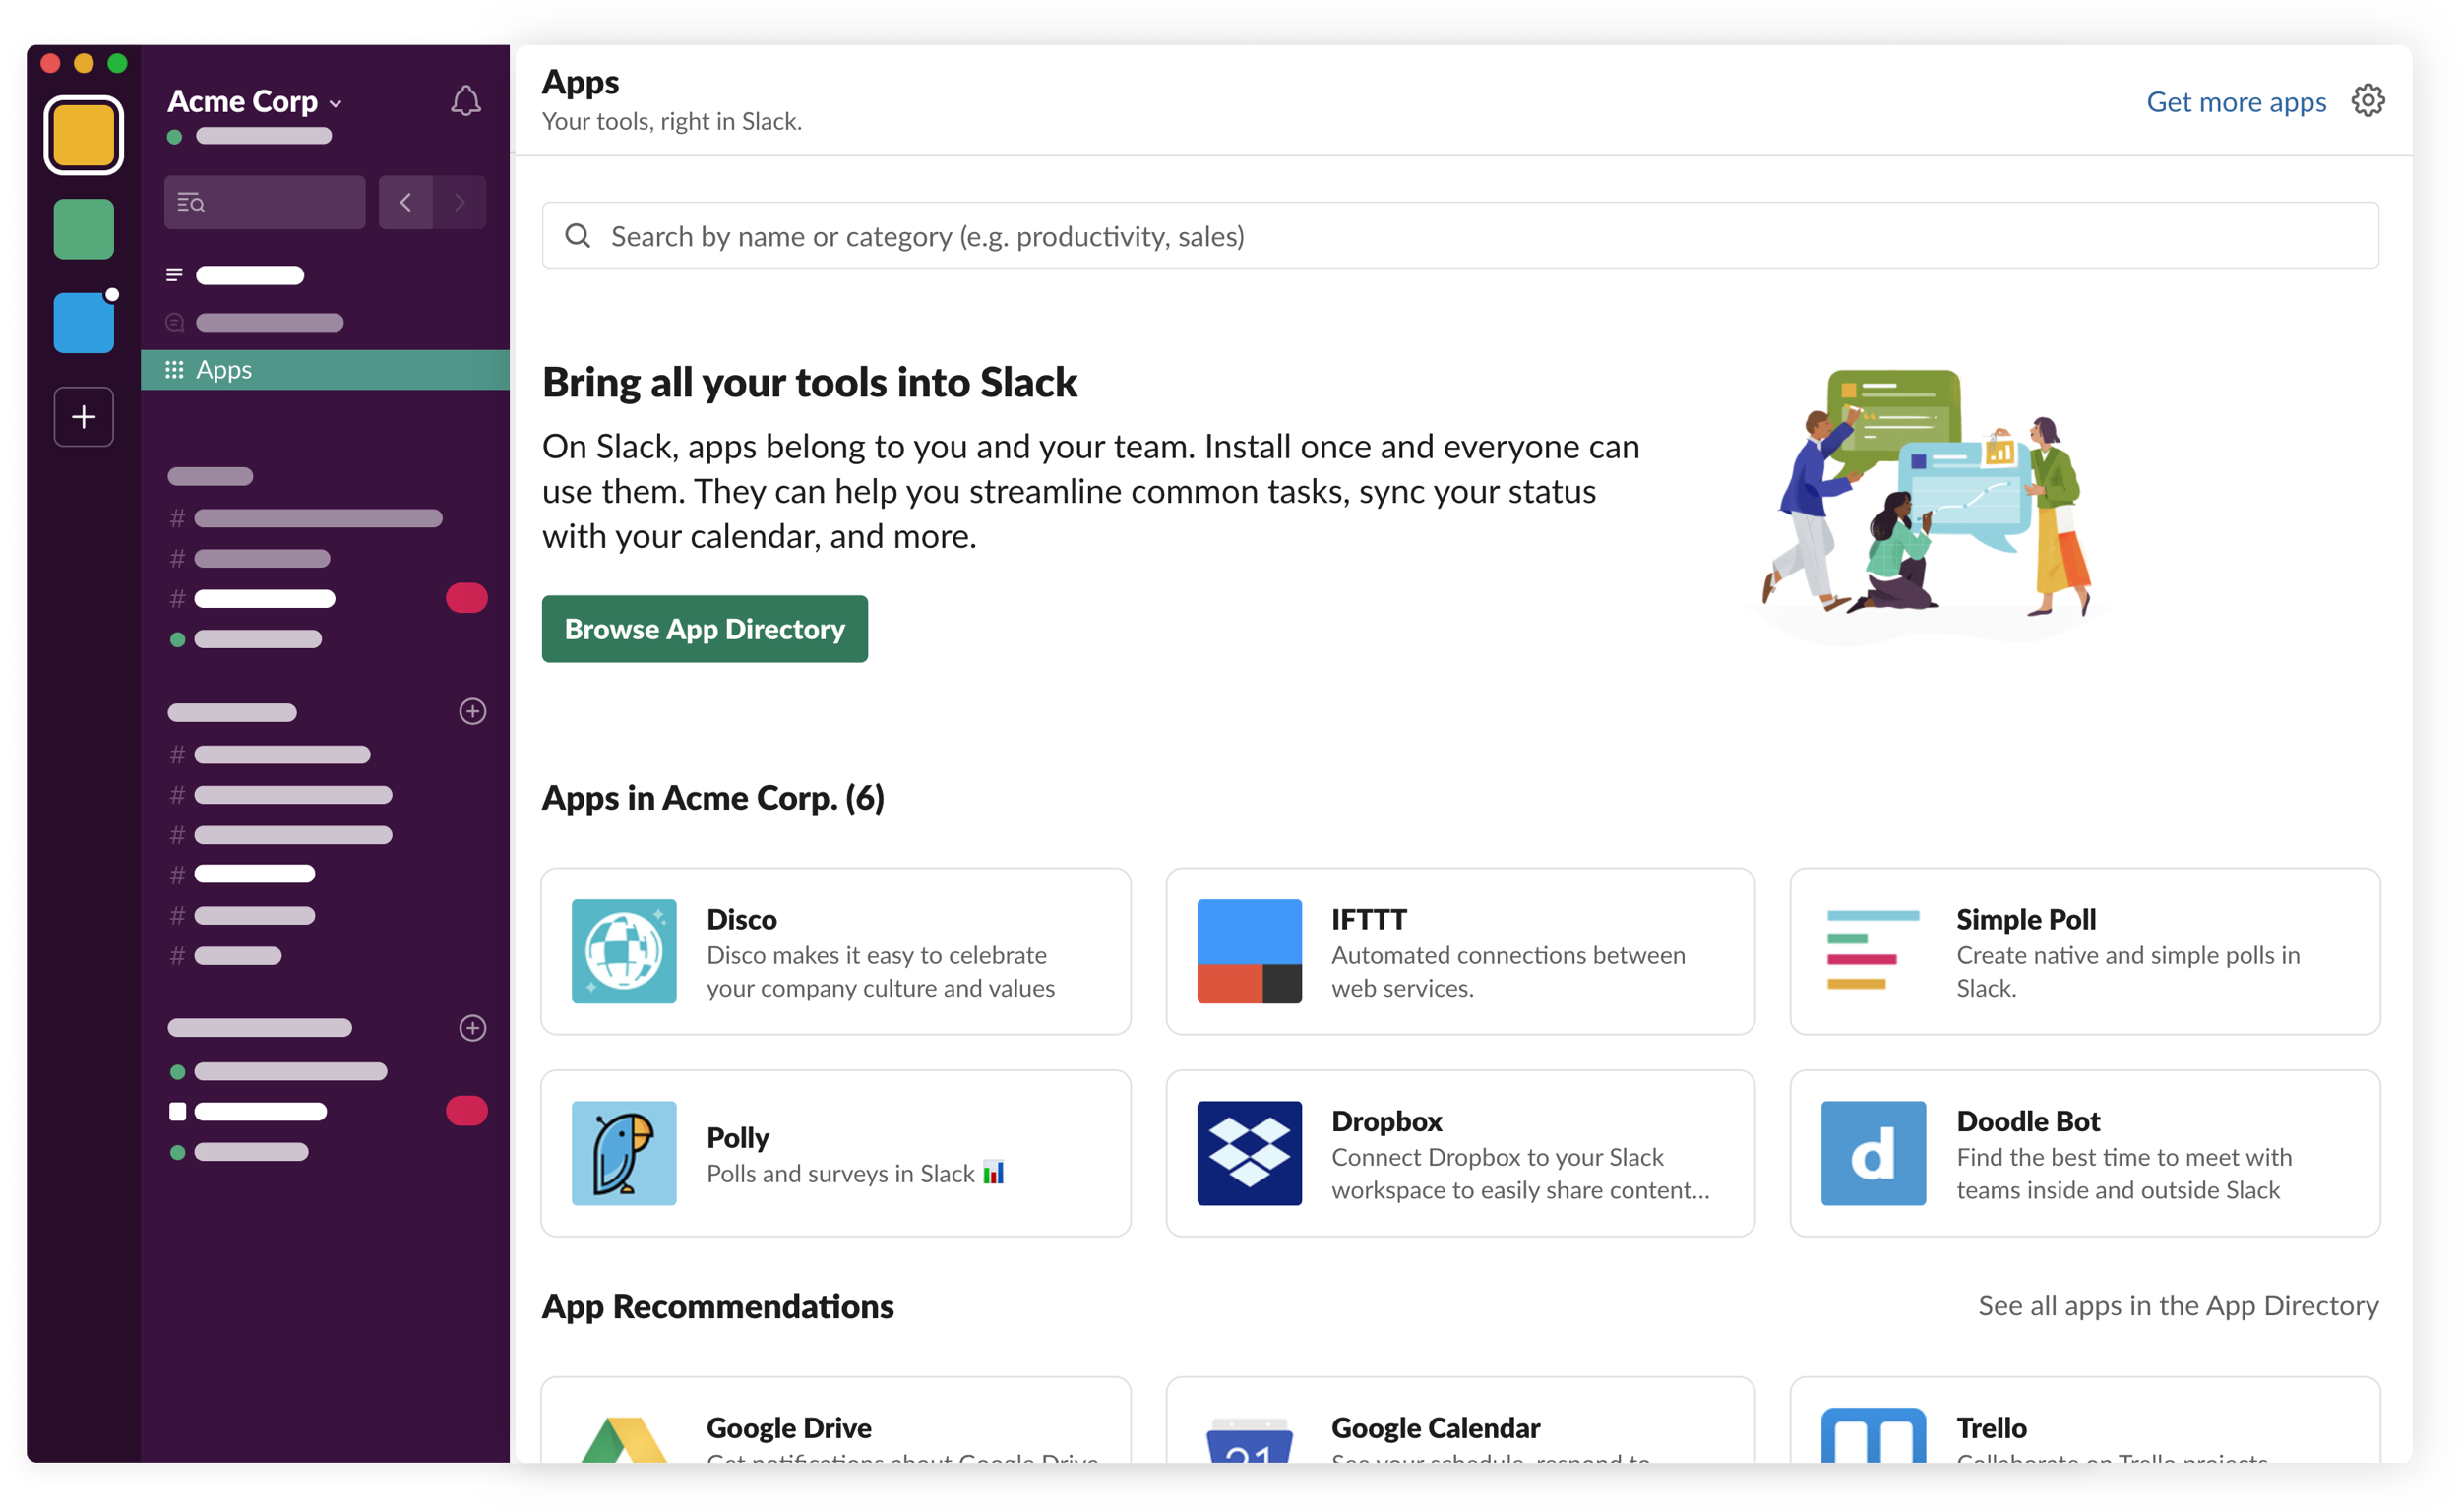 43 Top Photos Slack App Directory Checklist : The 13 Free Slack Apps That Will Make Your Team Even More Productive